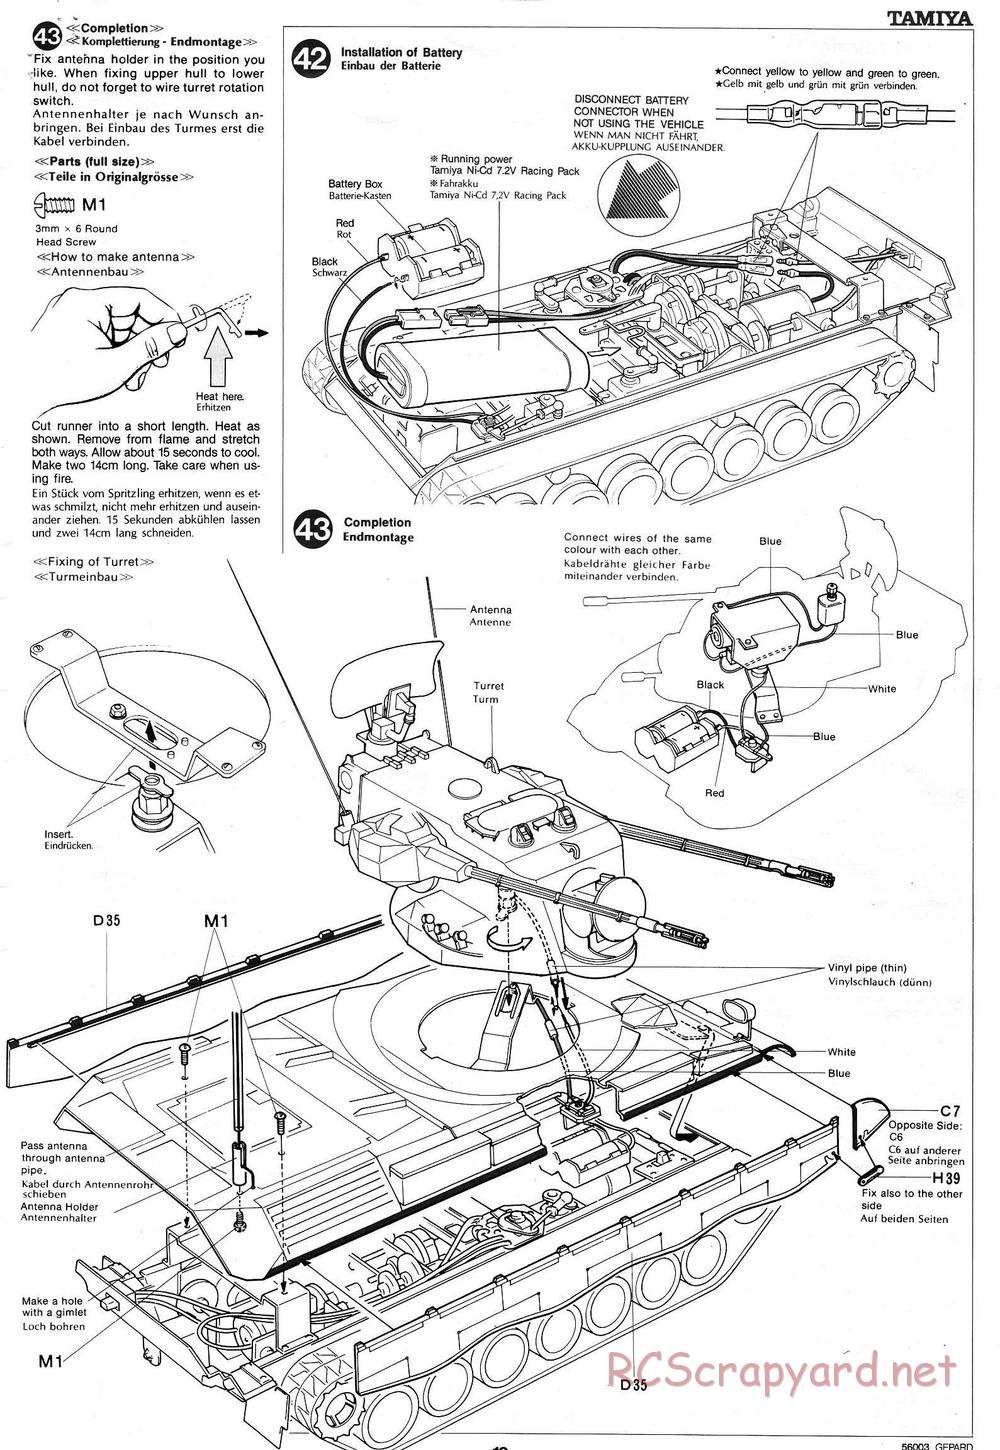 Tamiya - Flakpanzer Gepard - 1/16 Scale Chassis - Manual - Page 19